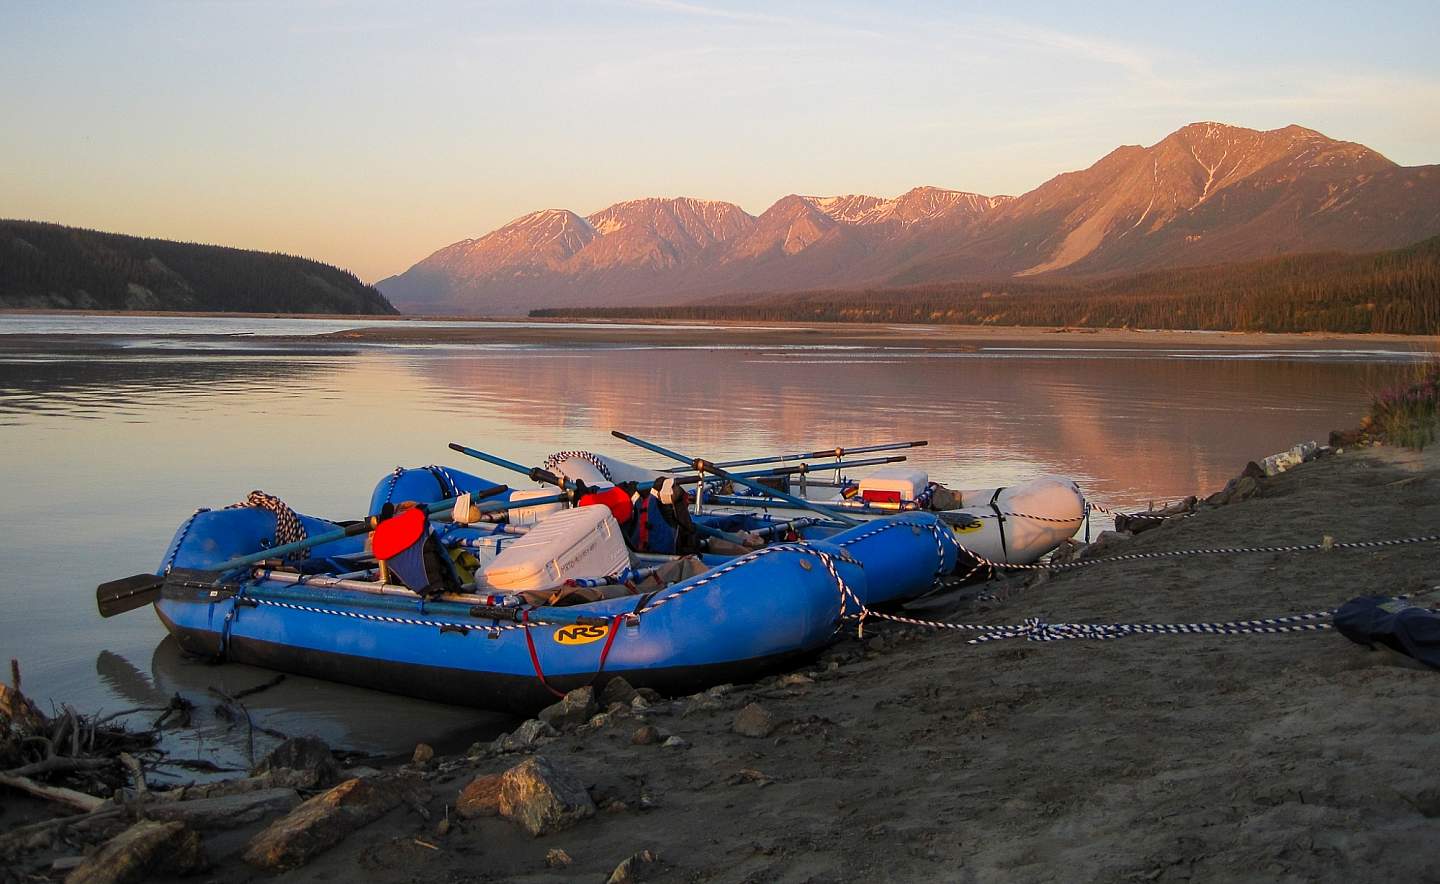 Inflatable rafts filled with camping gear docked on the beach of an Alaskan river.